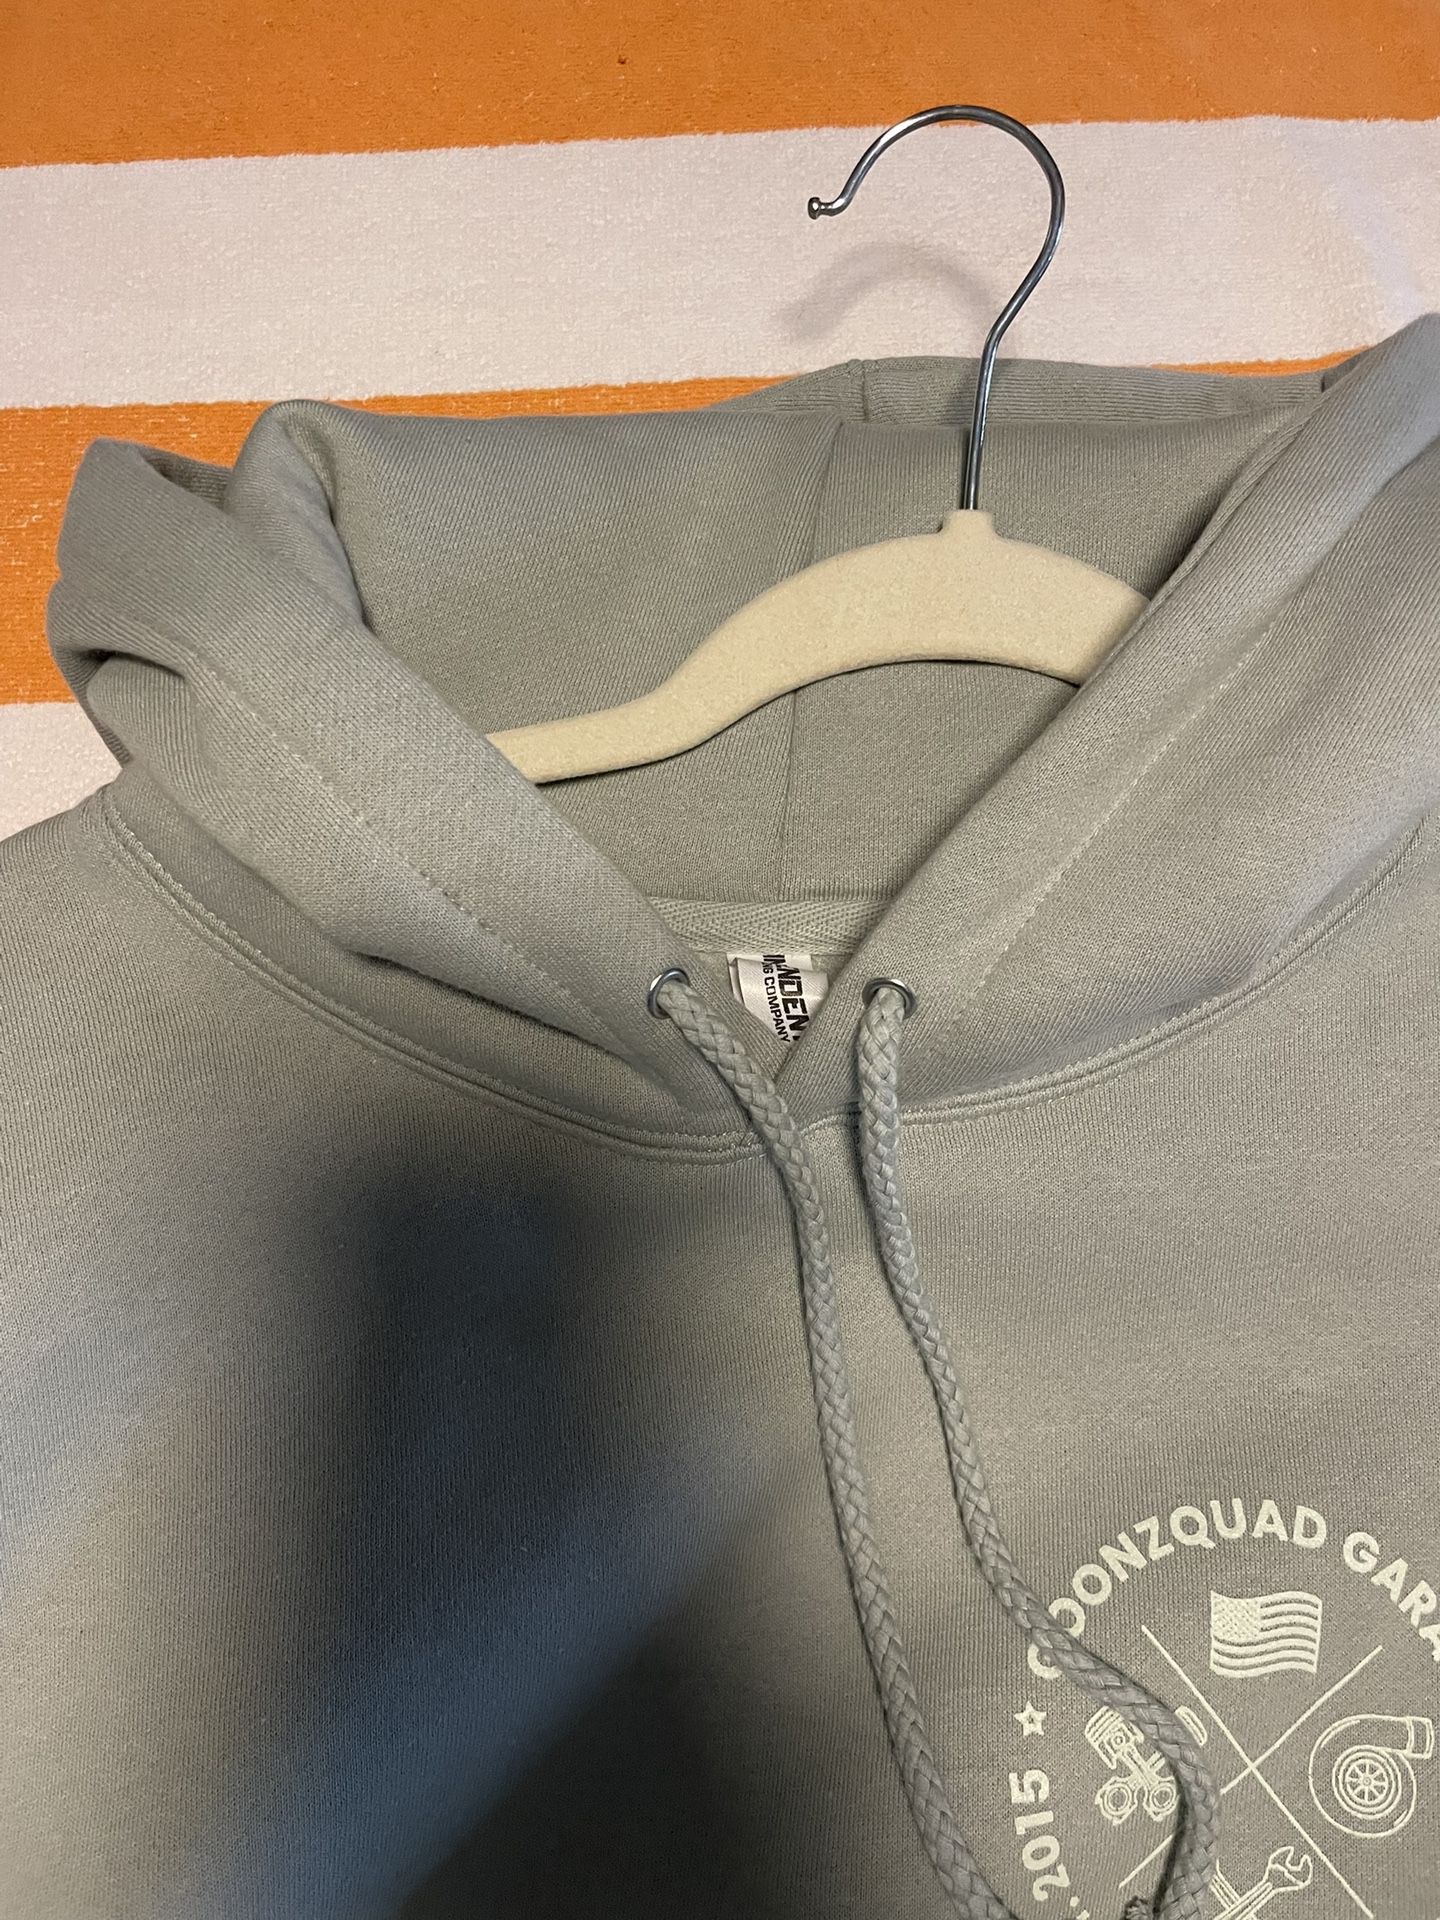 Thick Hoodie Size Large